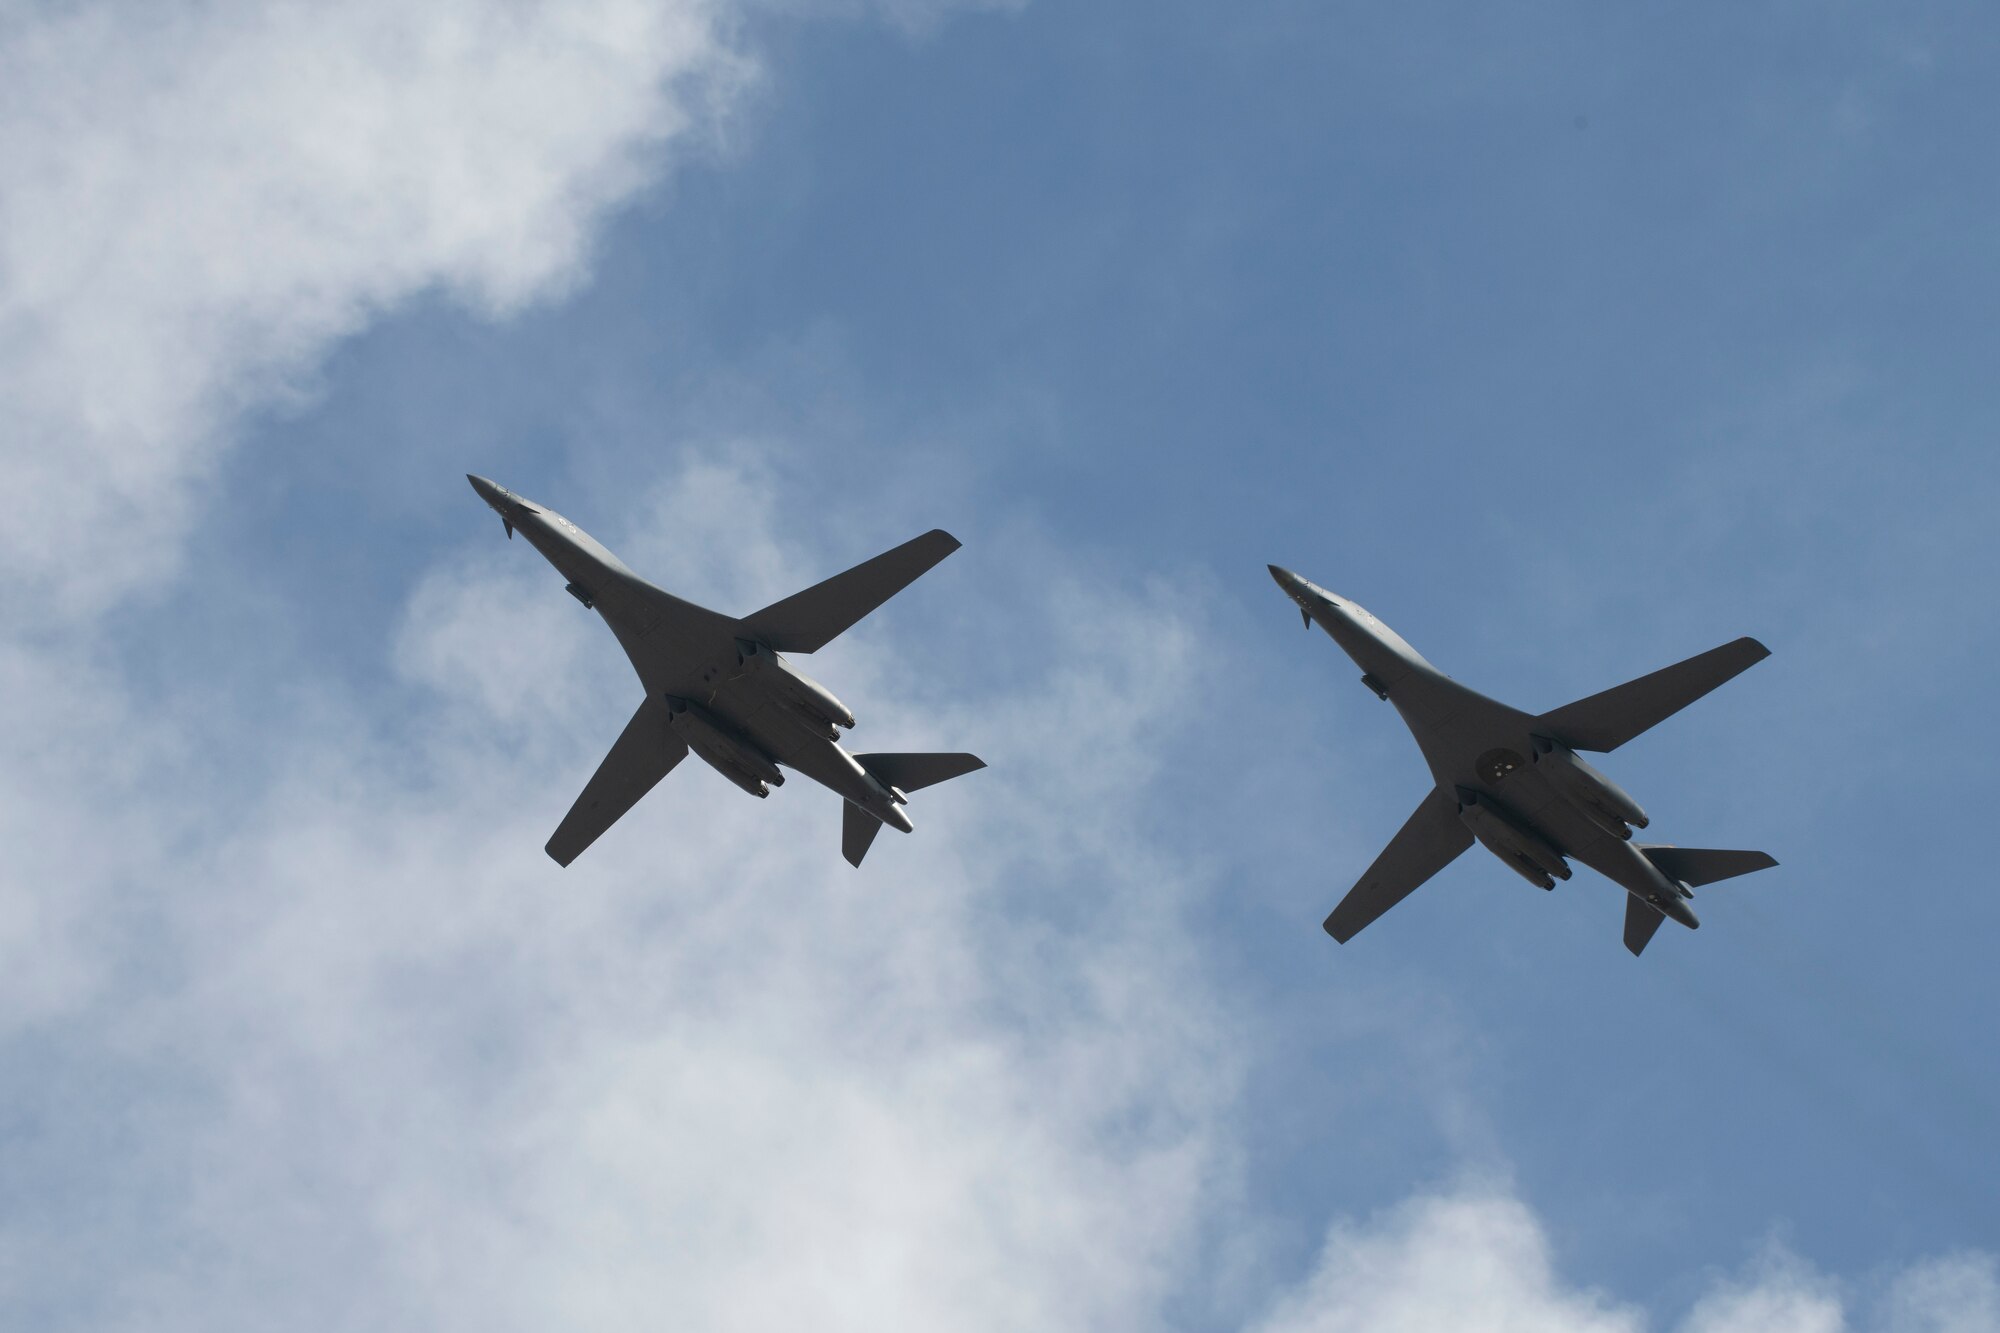 Two B-1B Lancers, assigned to the 28th Bomb Wing, Ellsworth Air Force Base, S.D., conduct a flyover before landing at Andersen AFB, Guam, July 17, 2020. The Bomber Task Force is deployed to Andersen AFB in support of Pacific Air Forces’ training efforts with allies, partners and joint forces. (U.S. Air Force Photo by Airman 1st Class Christina Bennett)